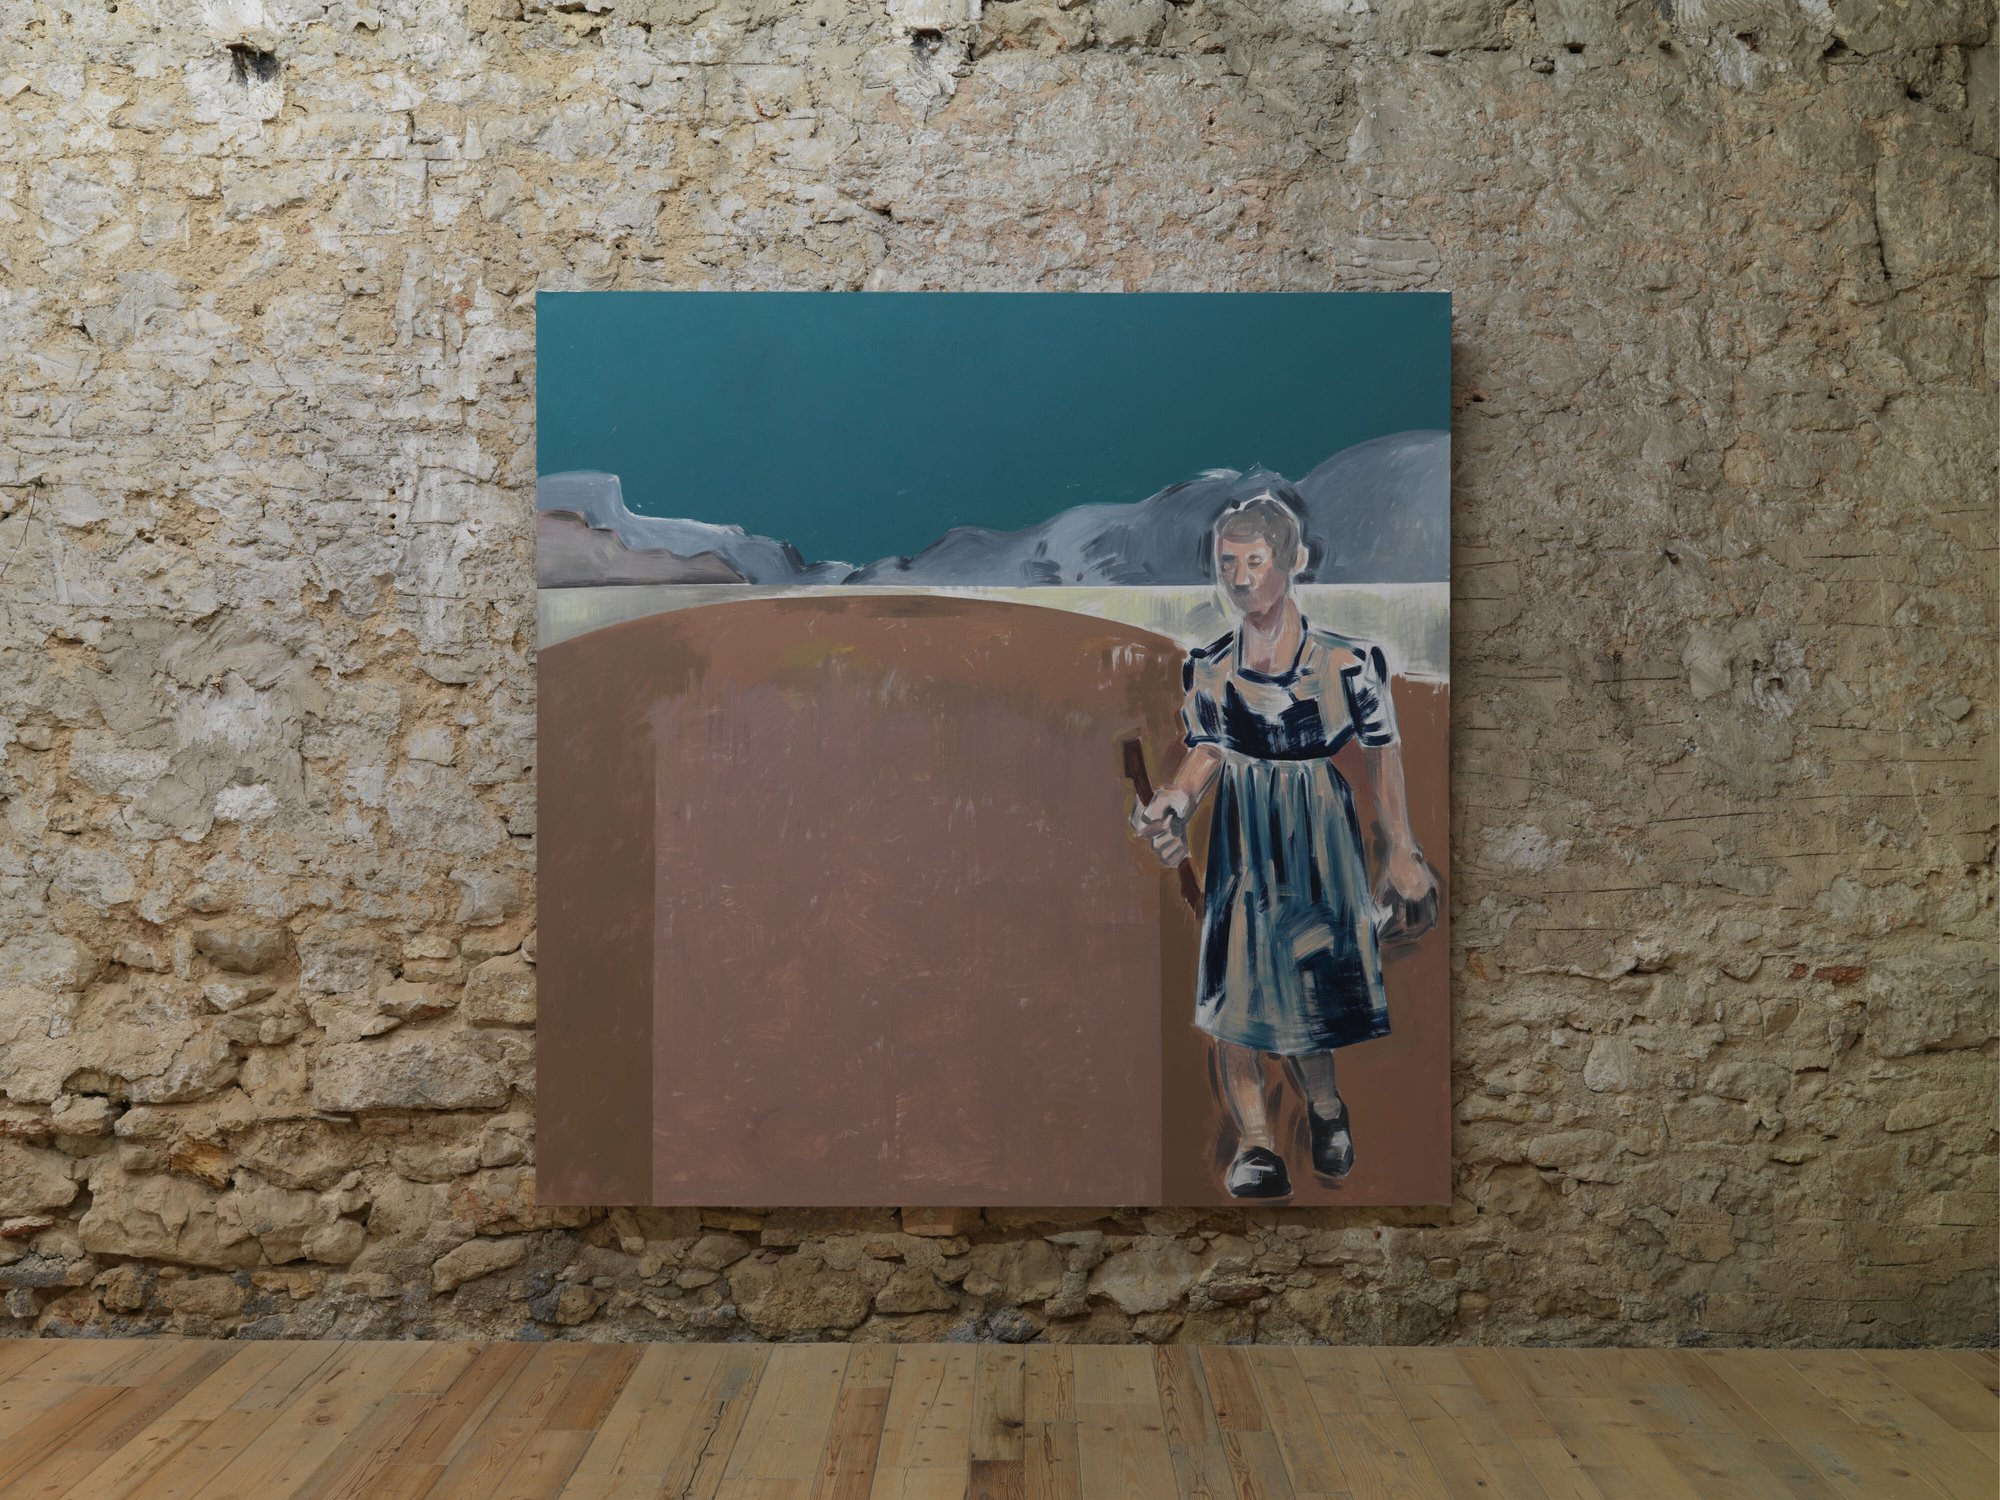 Apostolos Georgiou, Untitled, acrylic on canvas, 230 x 230 cm, 2020. Installation view, Ένας Ένας - One by One, RODEO, Piraeus, 2020